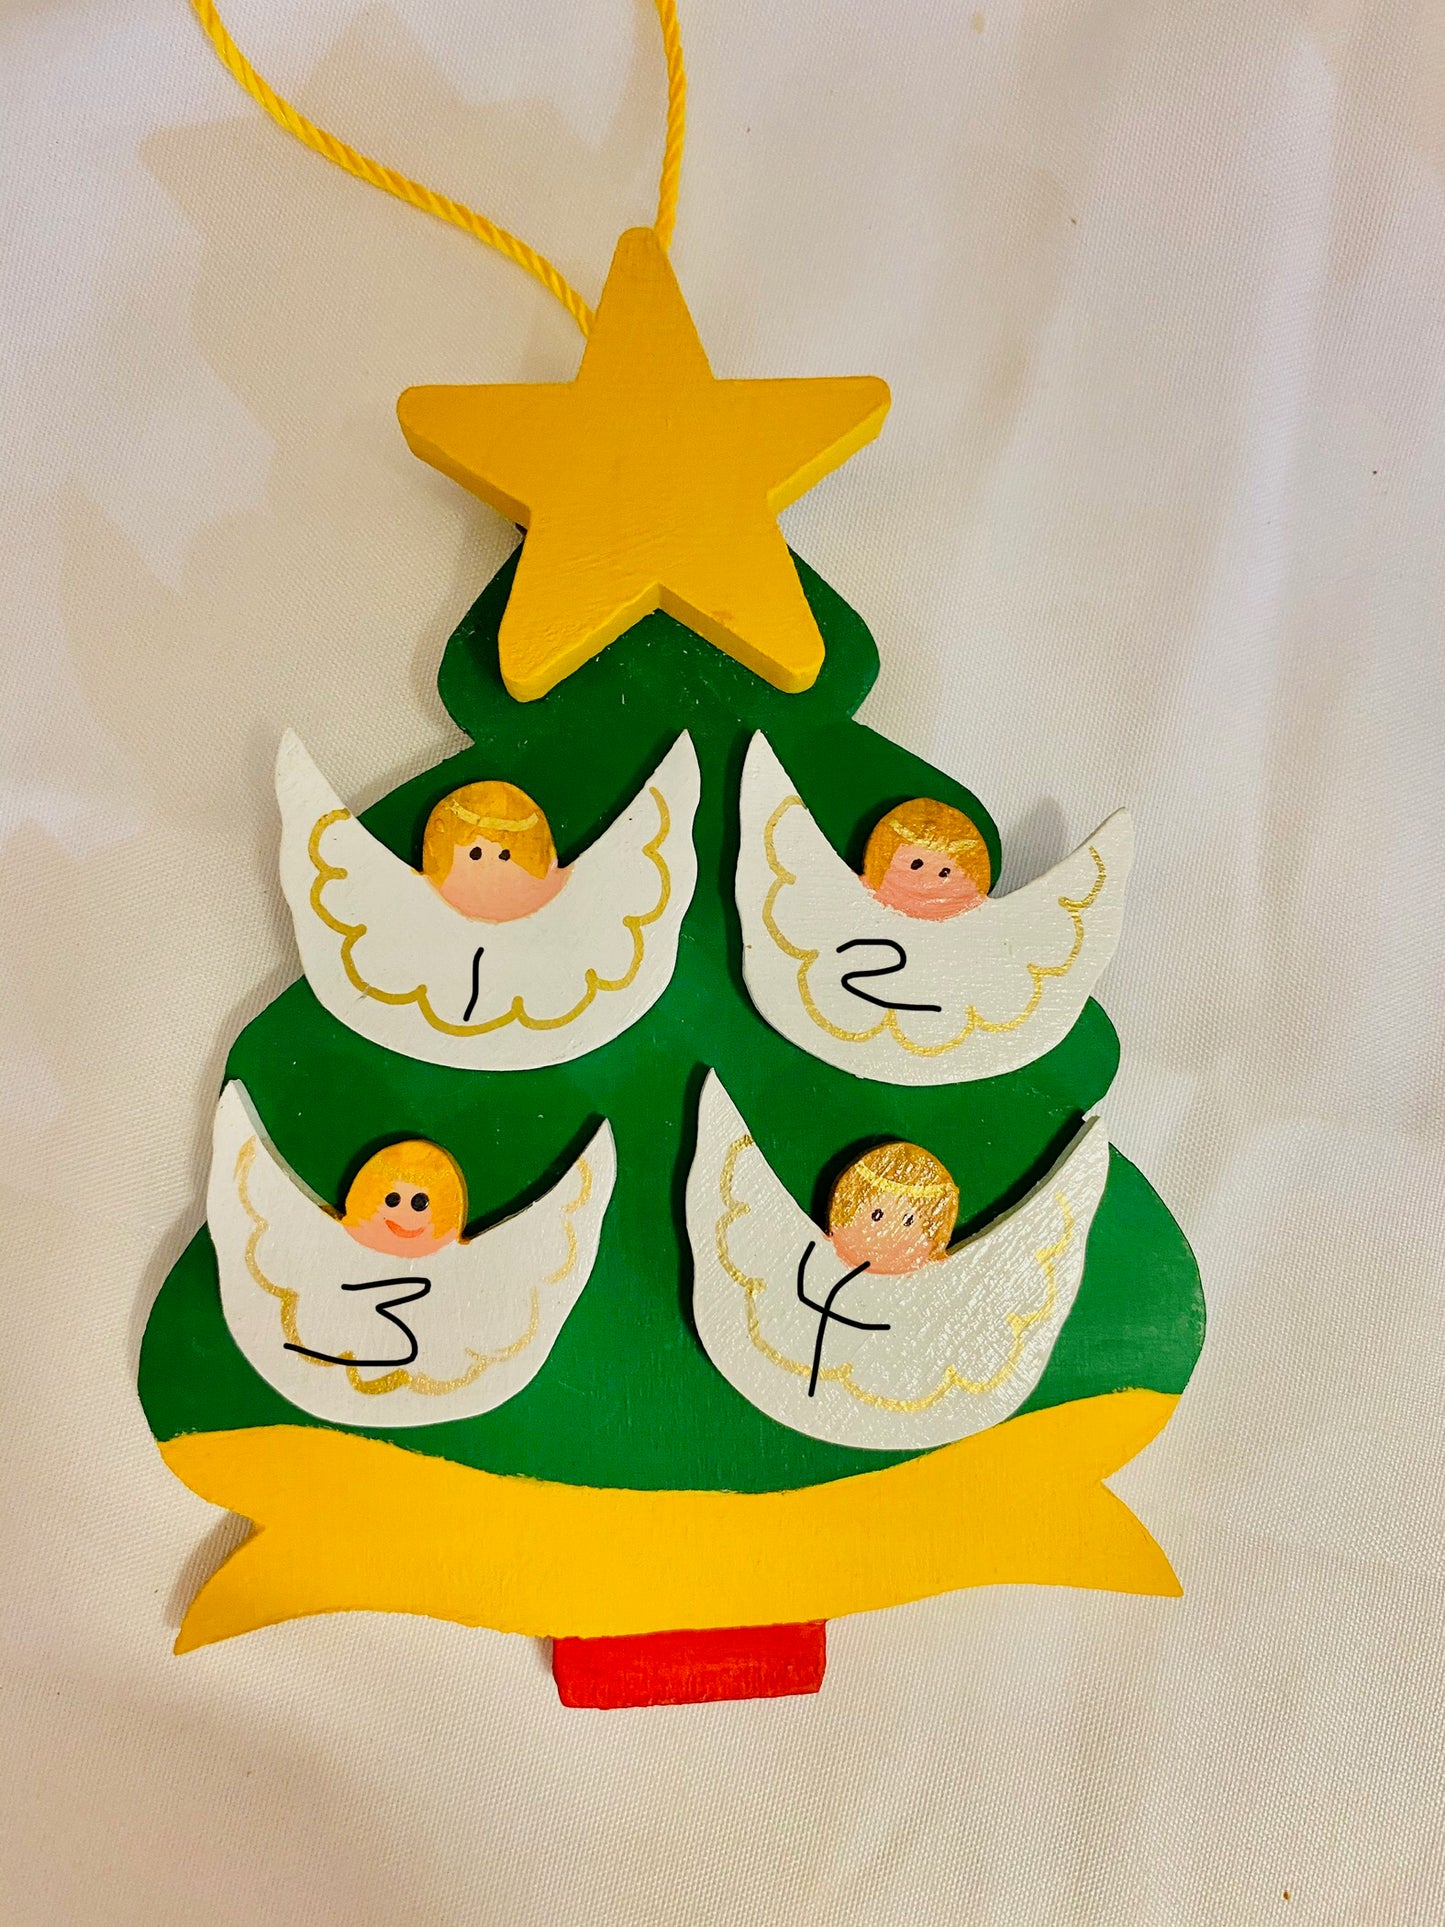 Personalized Ornament with  4 Angels on a Christmas Tree 4.5" x 3.5"